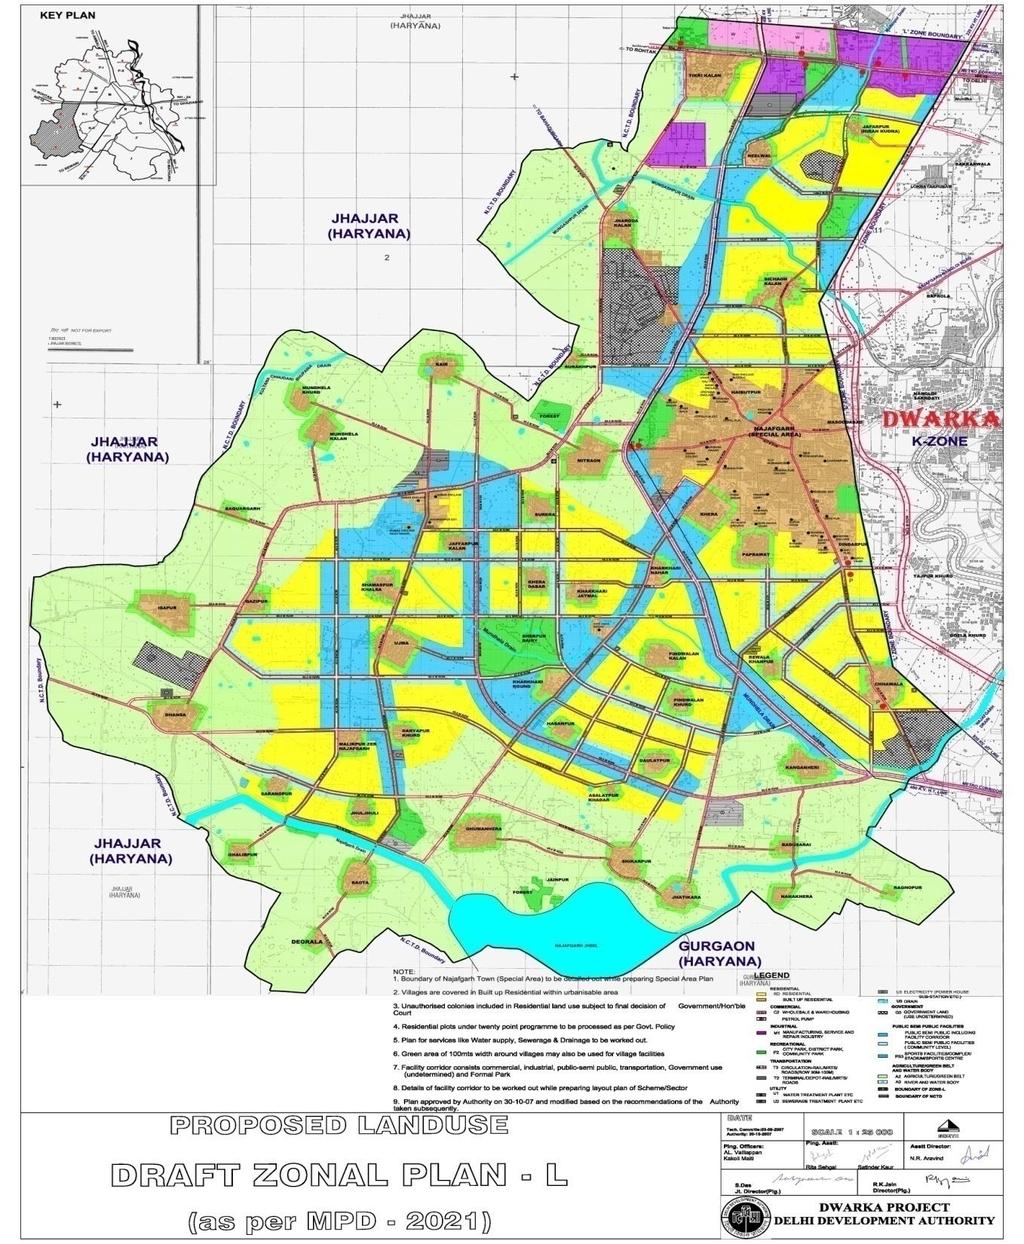 L-ZONE South West Delhi High & mid end project developments likely. Land prices from 4.0 to 6.